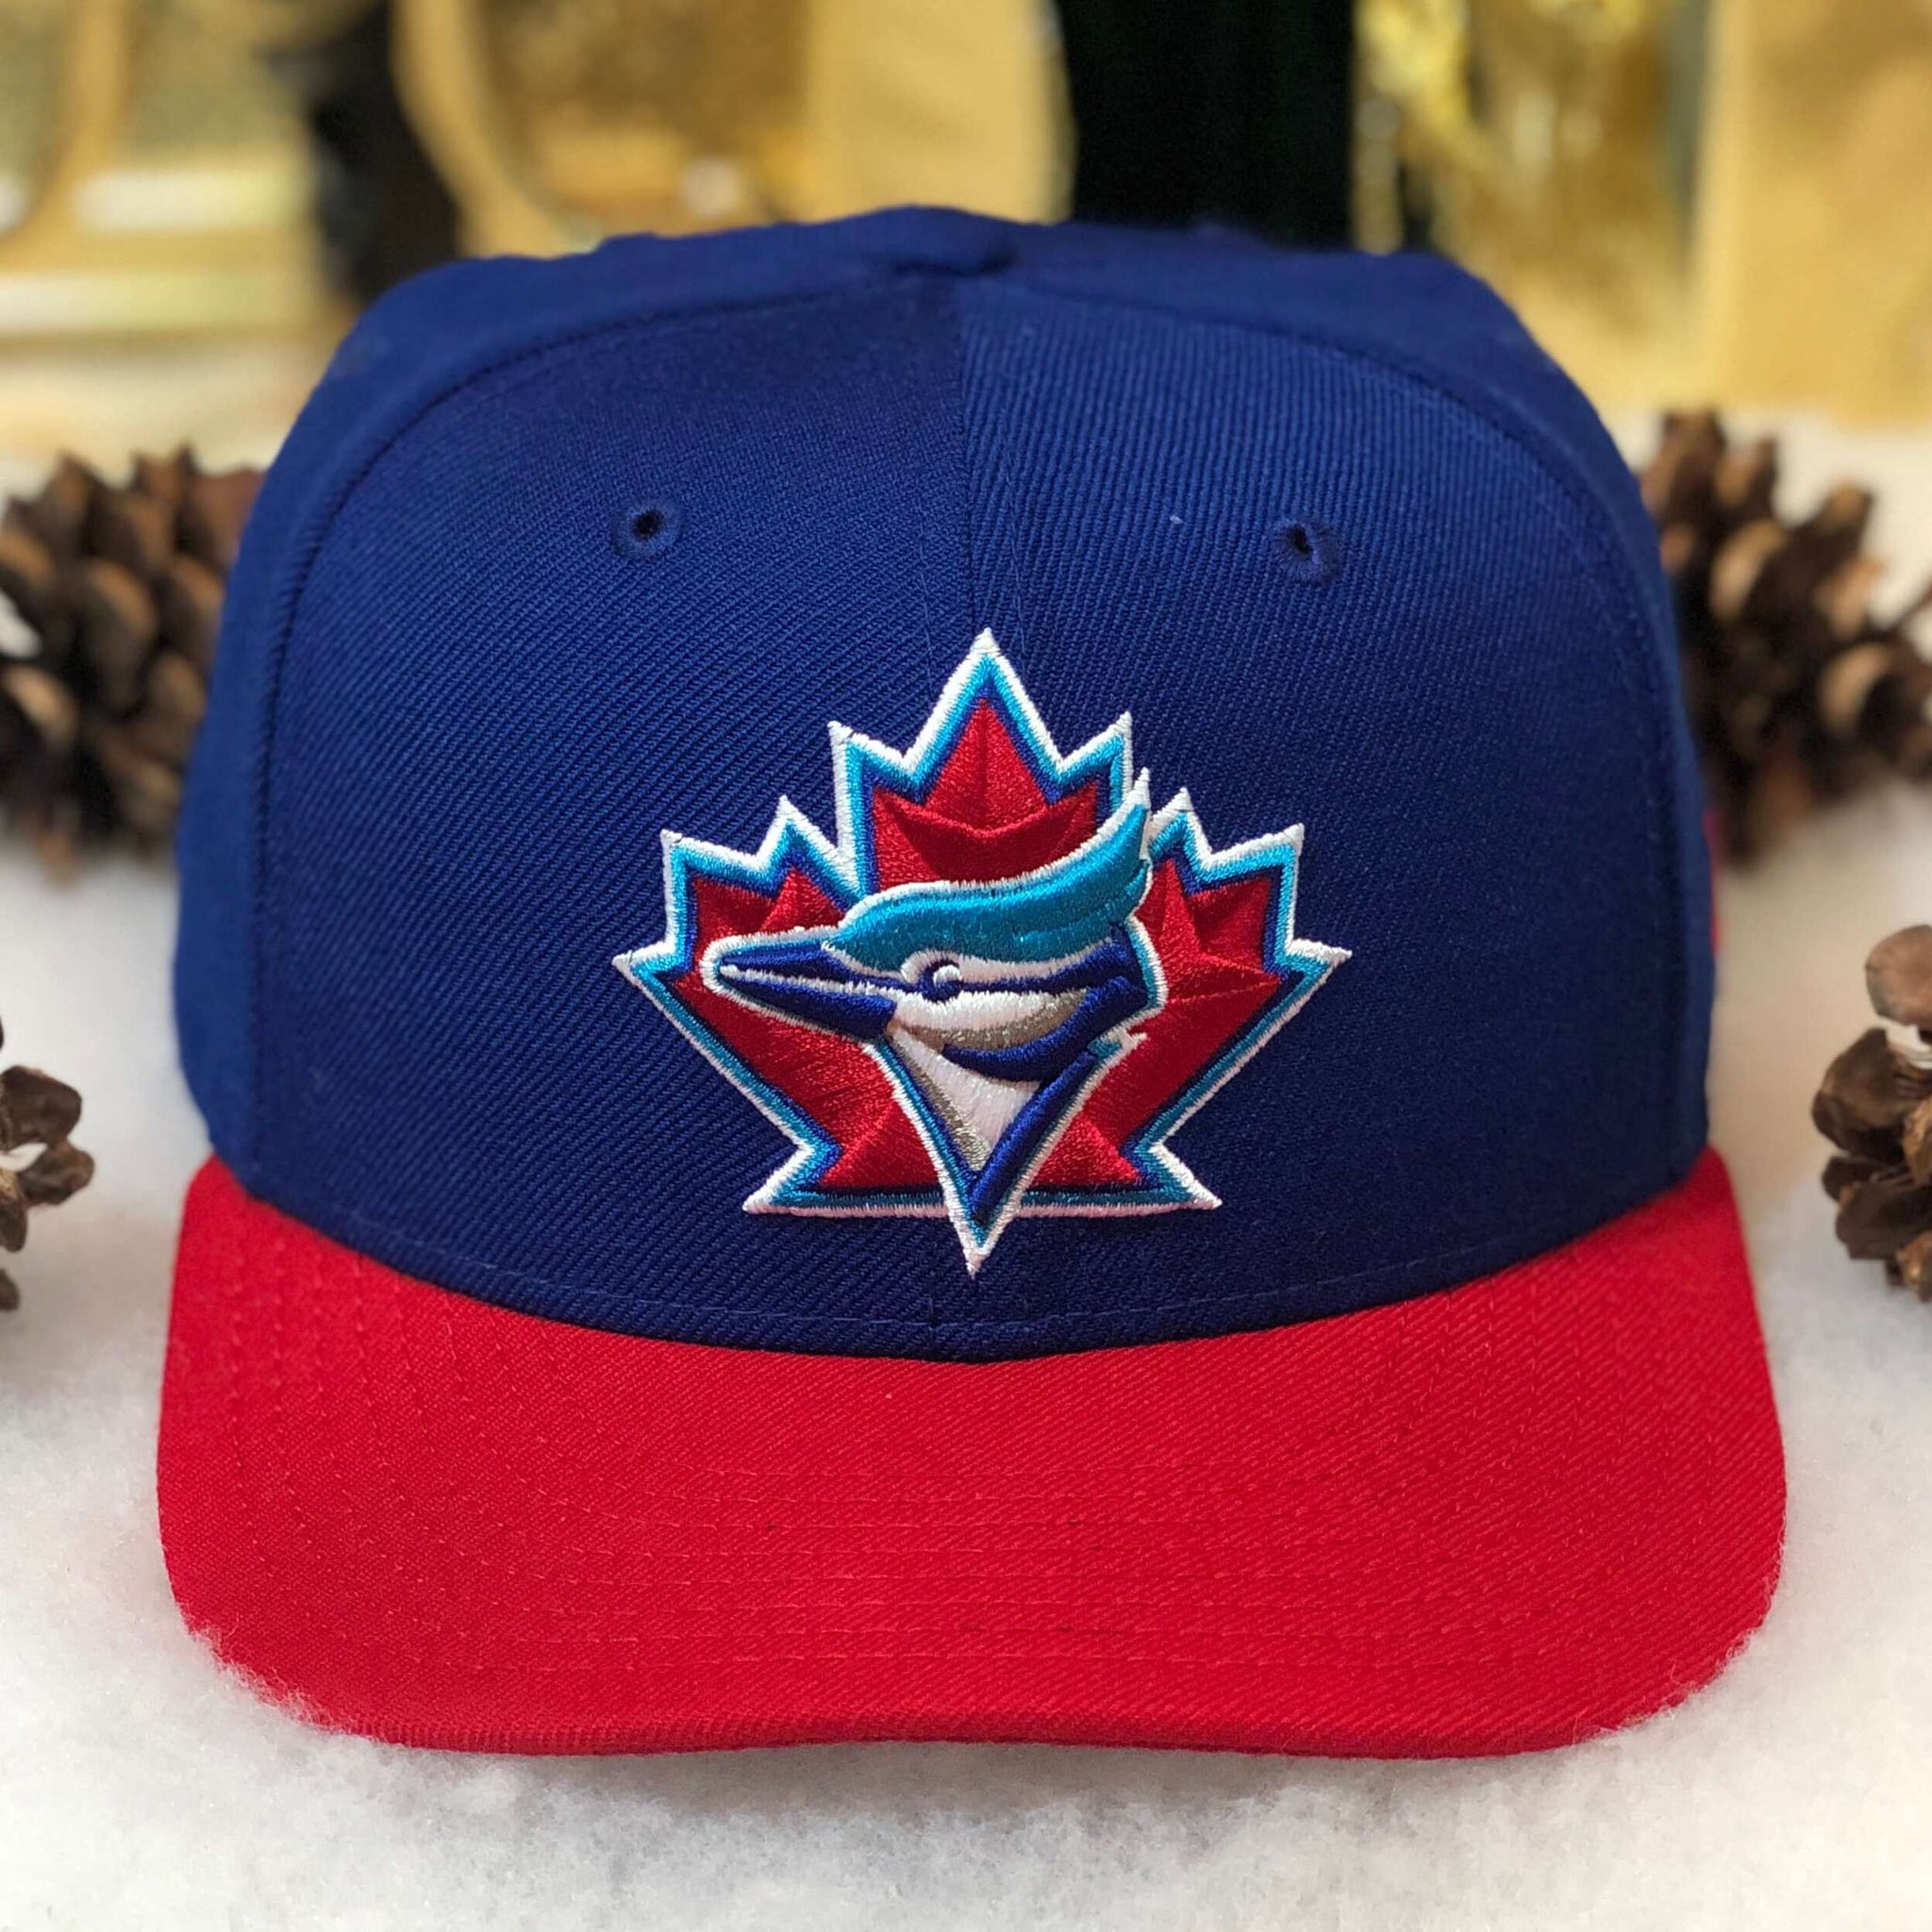 MLB Toronto Blue Jays Cooperstown Collection New Era Fitted Hat 7 1/8